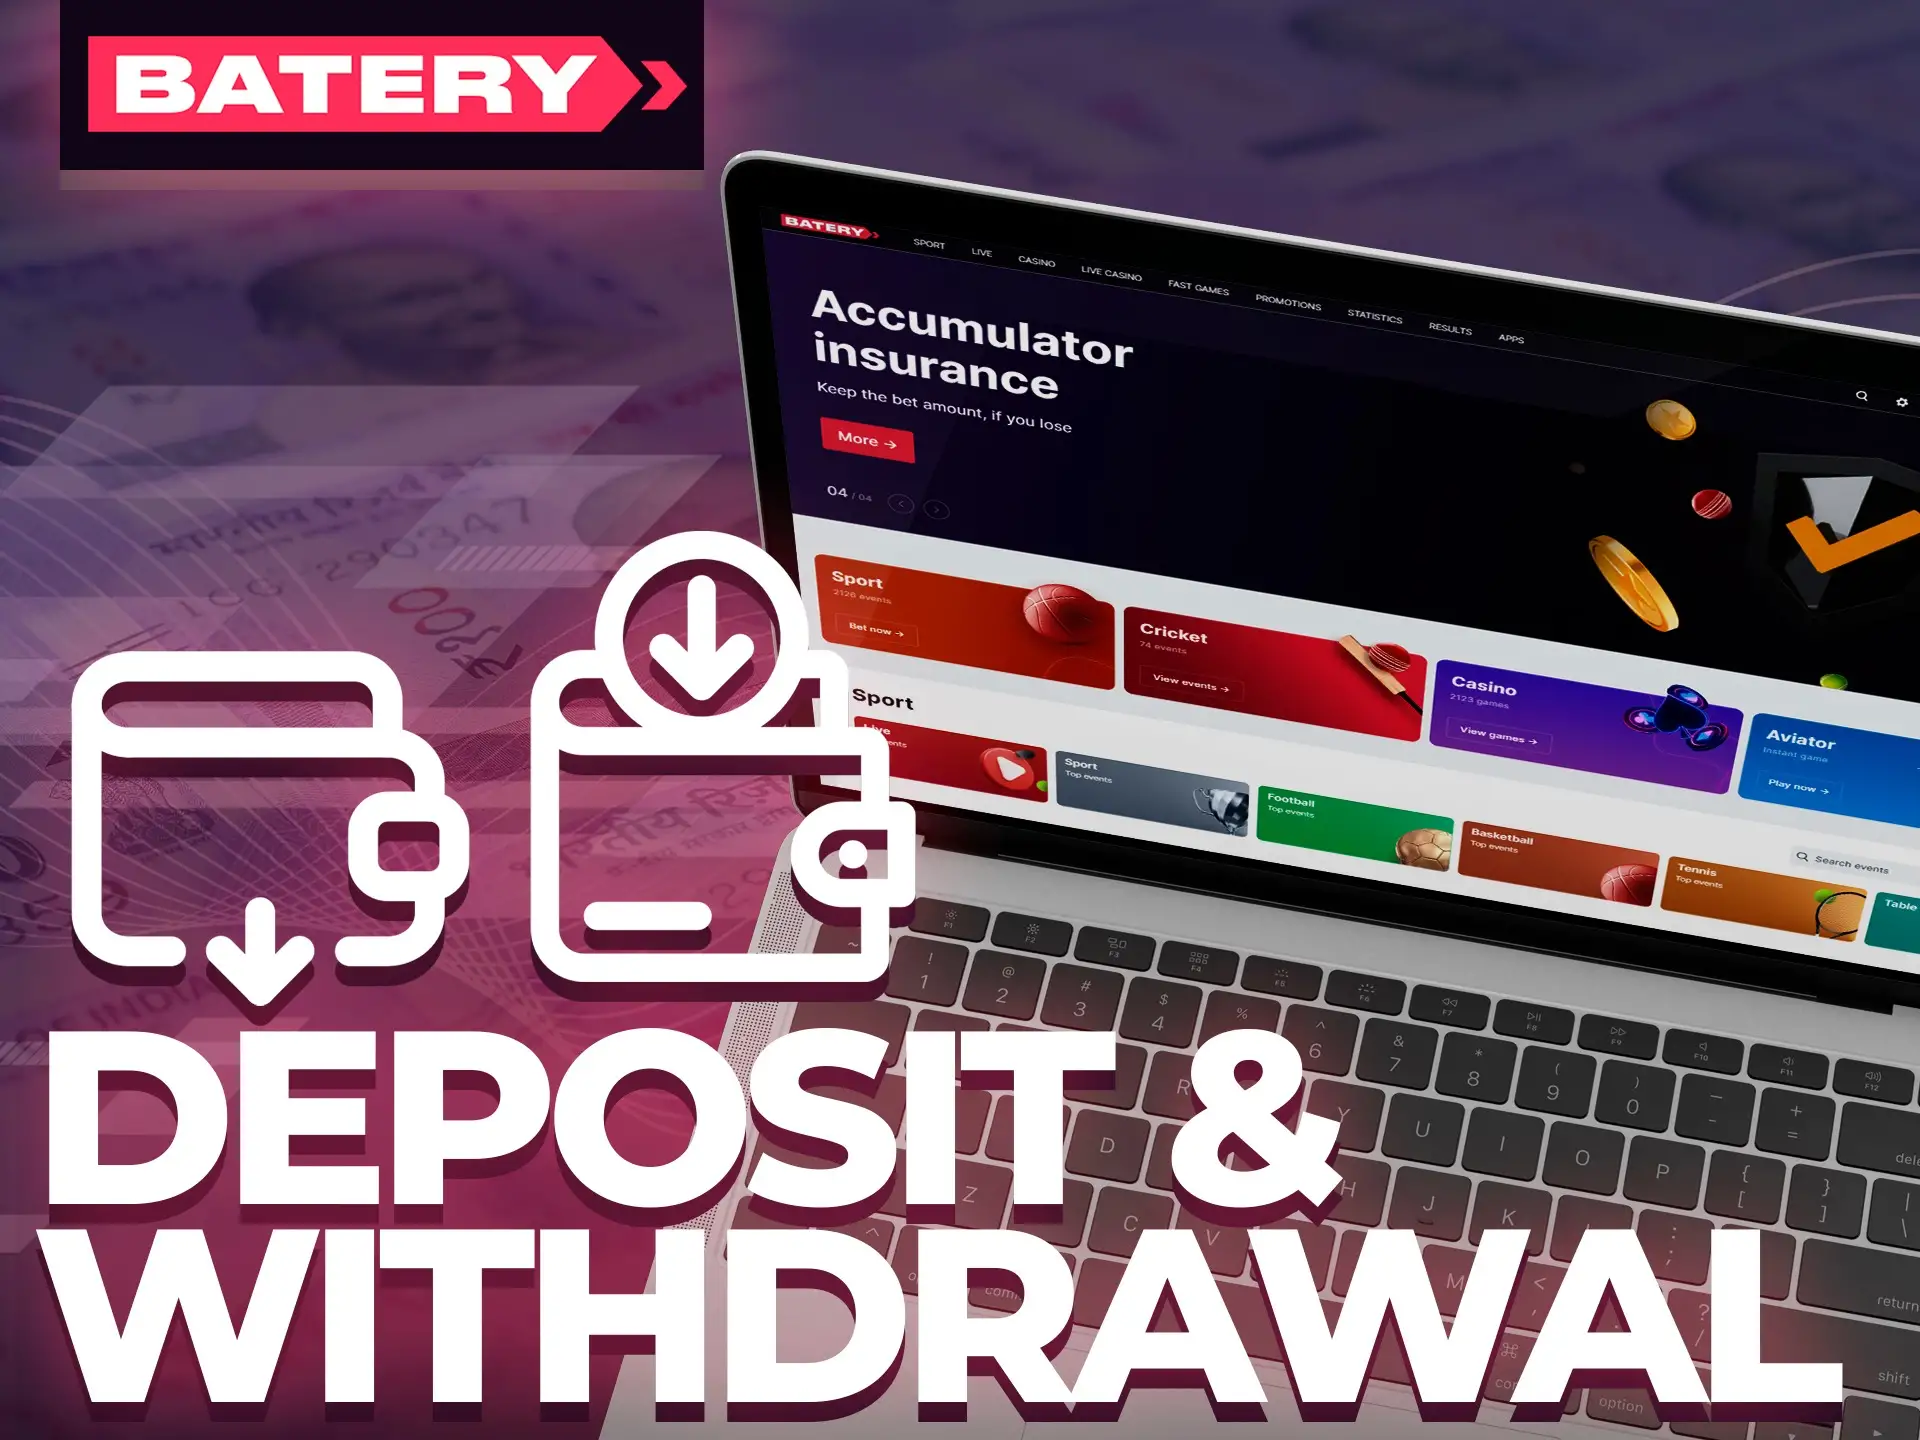 Deposit and withdraw money at Batery using your prefered payment methods.